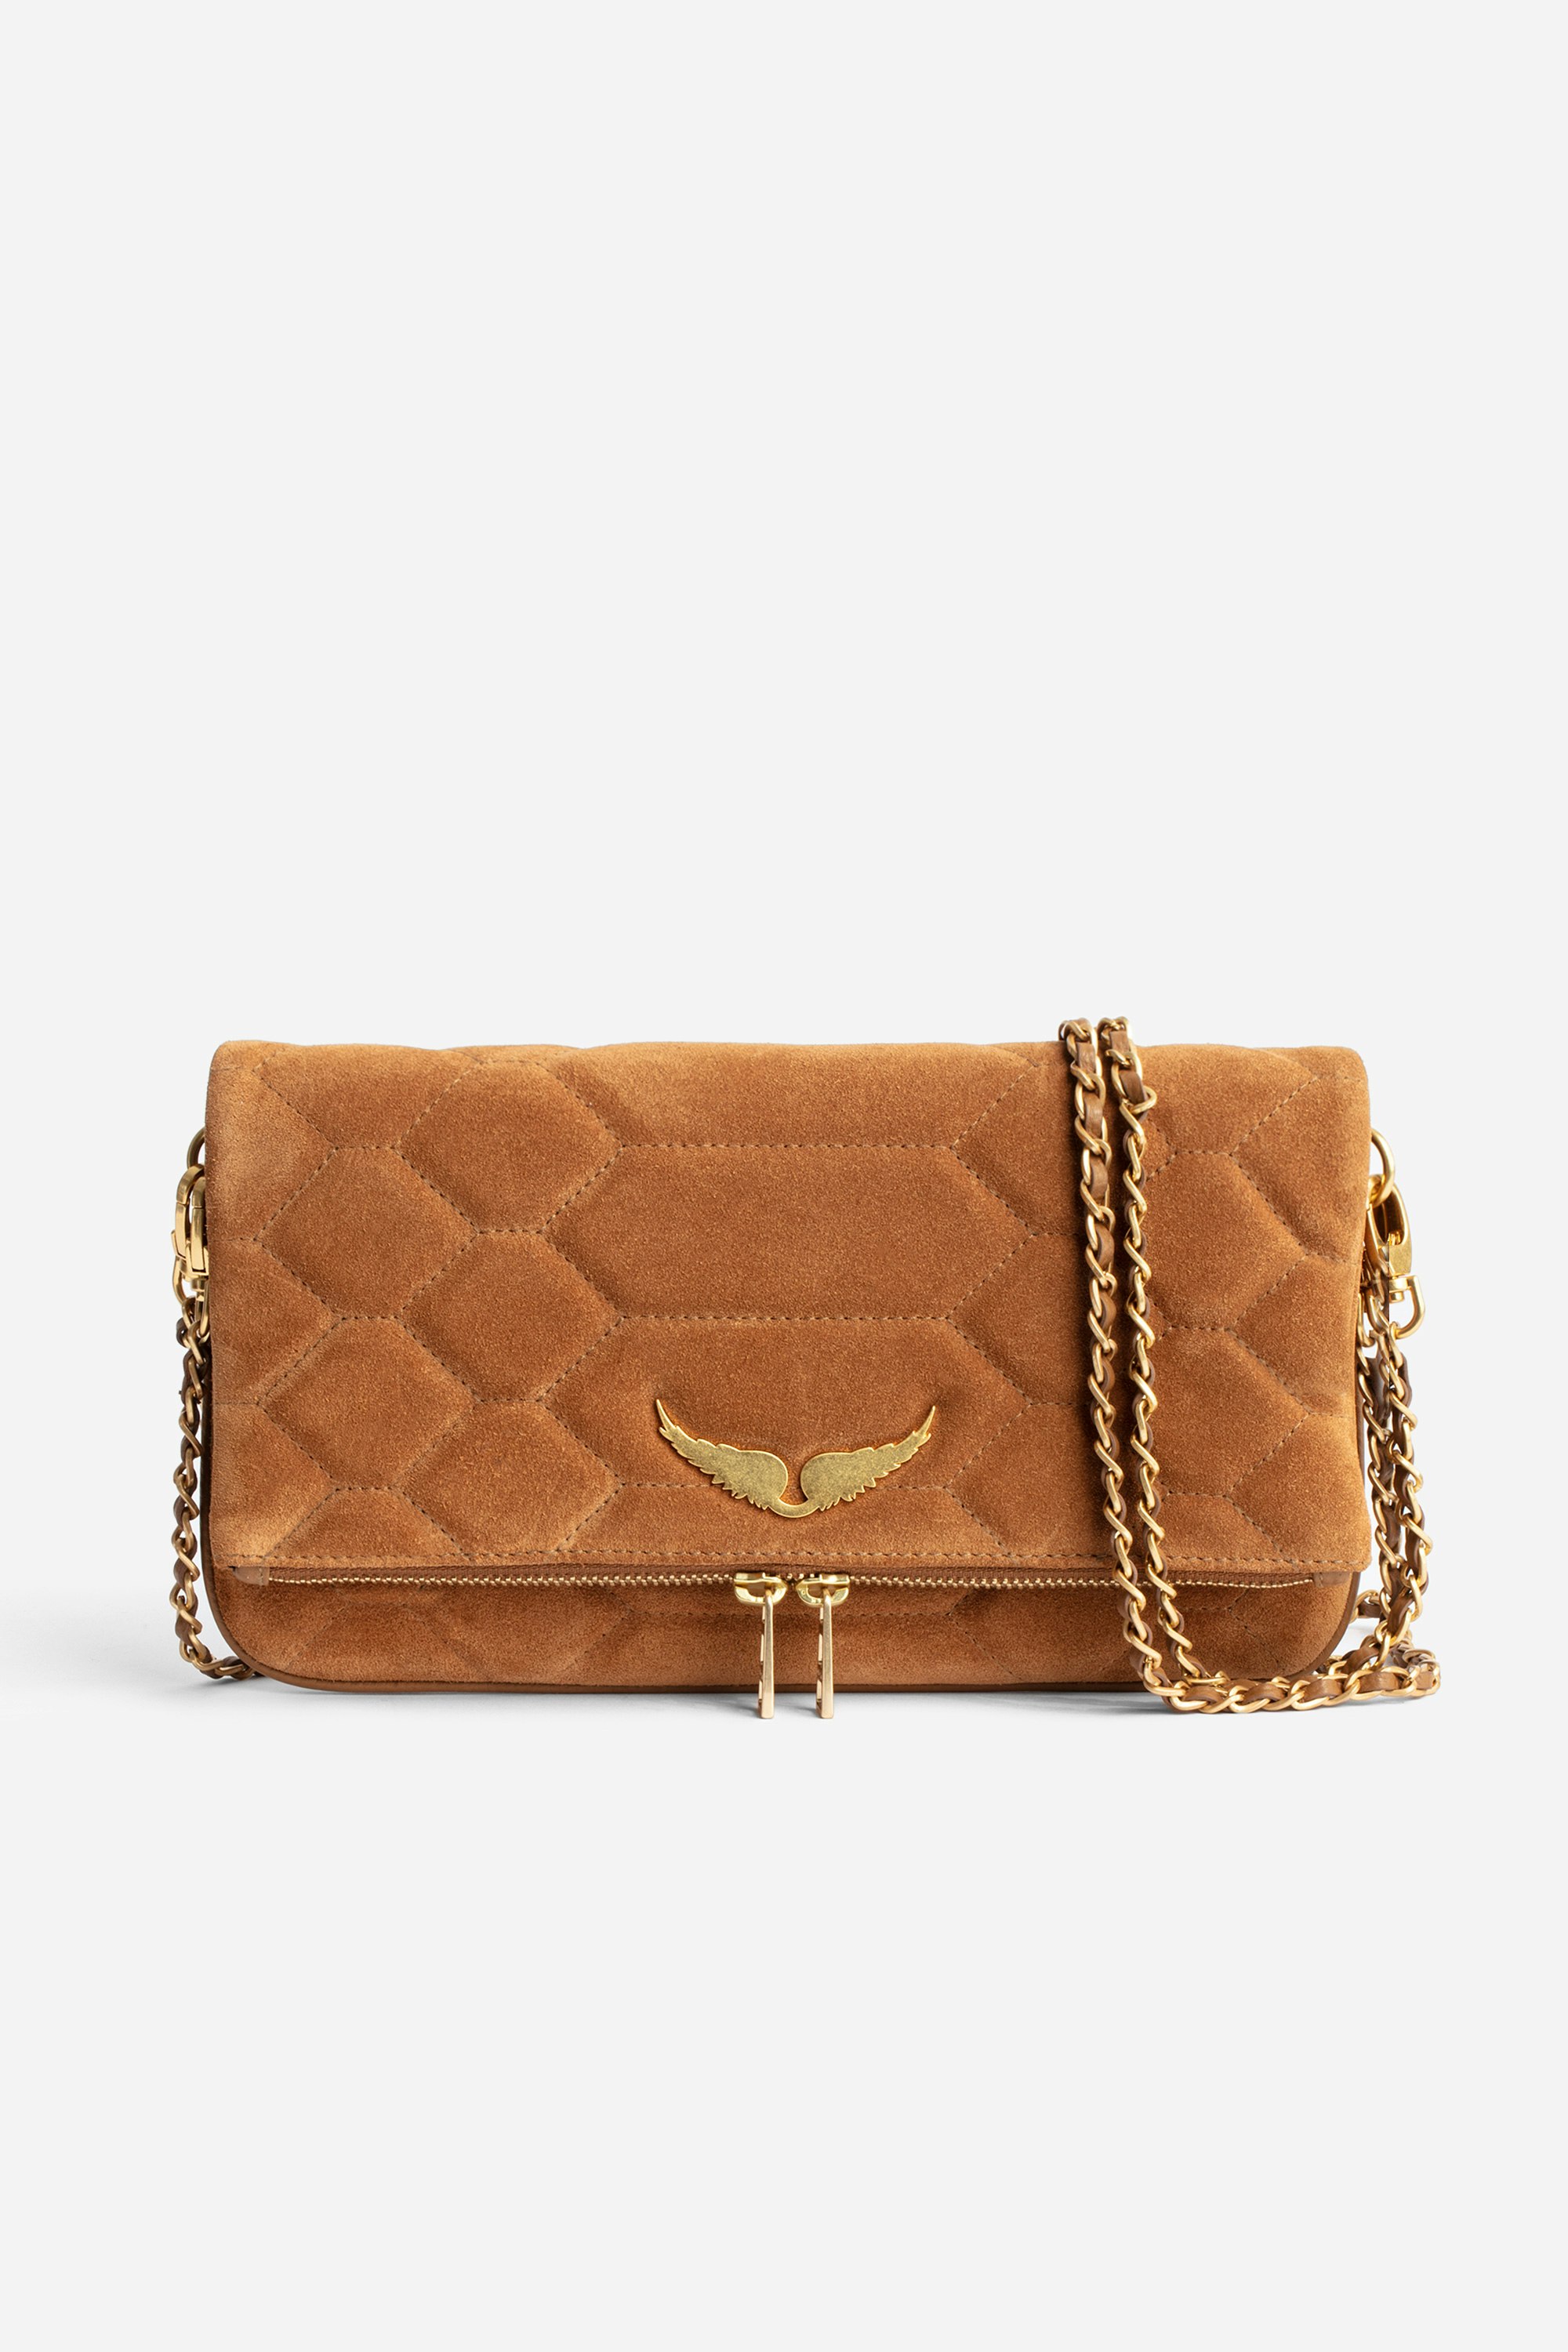 Rock Quilted Suede Clutch - Women’s camel snakeskin-effect quilted suede clutch with wings charm.